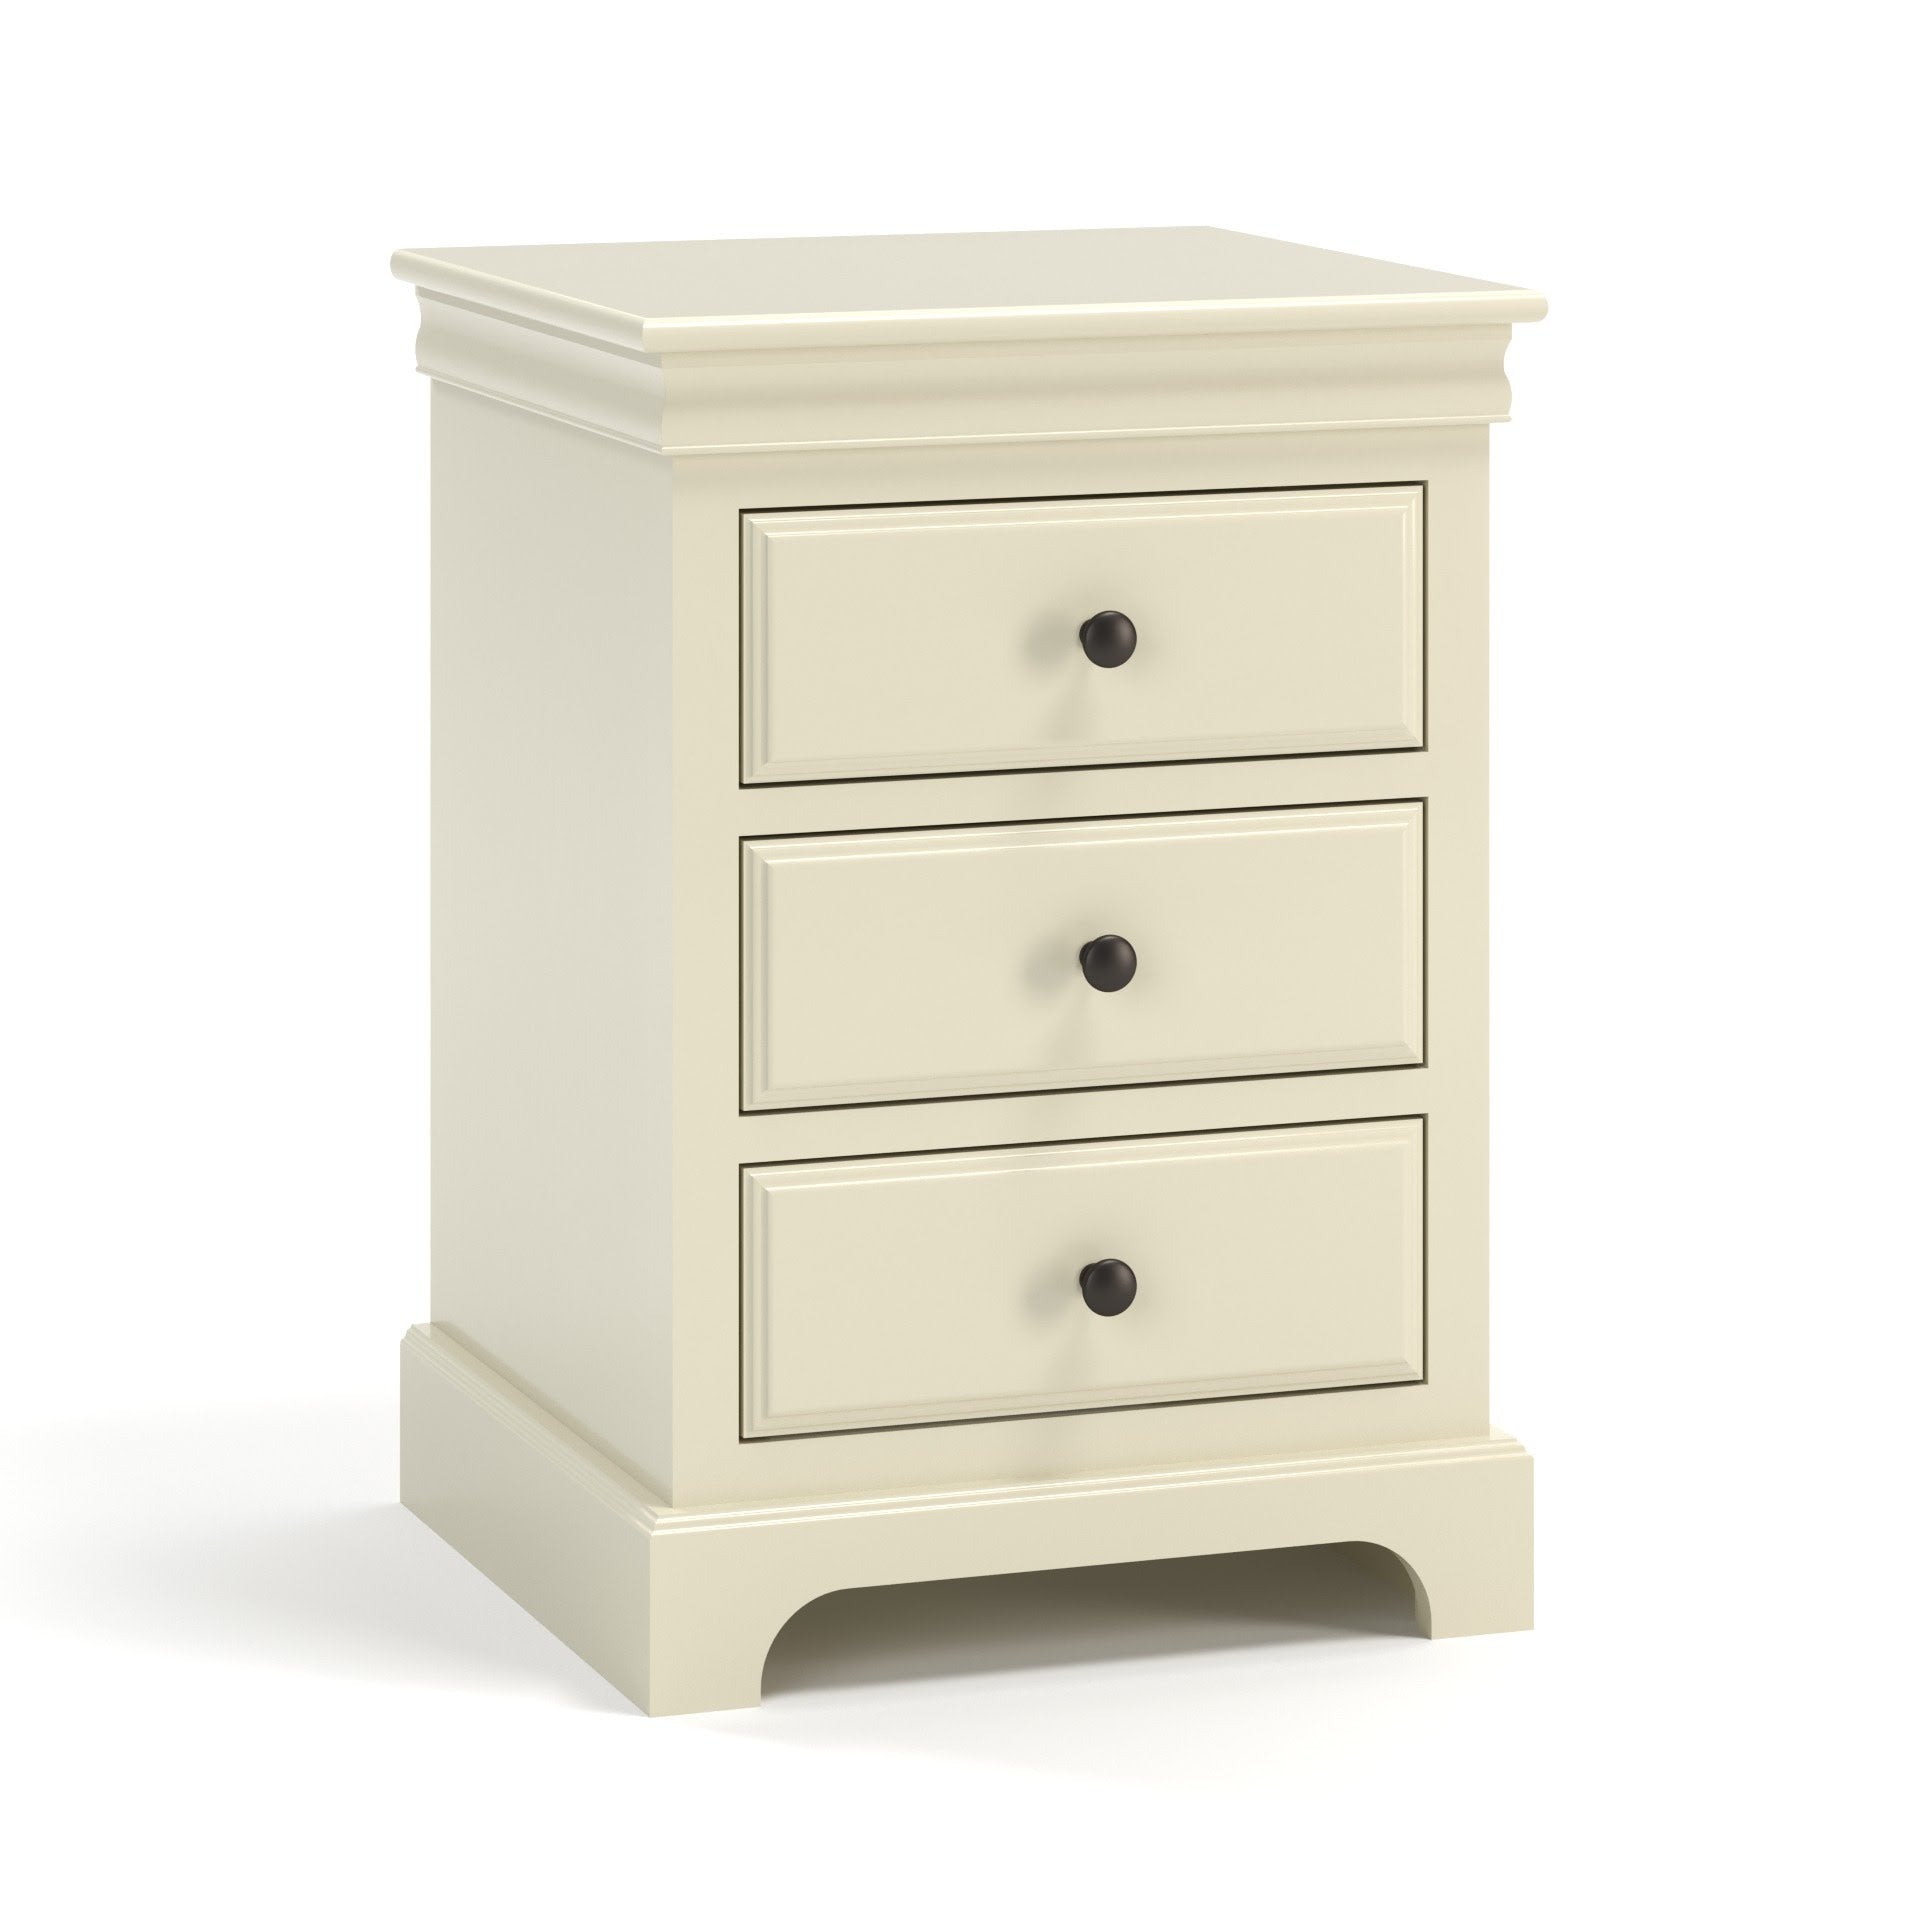 Acadia Madison Three Drawer Nightstand built from birch with crown molding and three full extension drawers. Pictured in Linen finish.